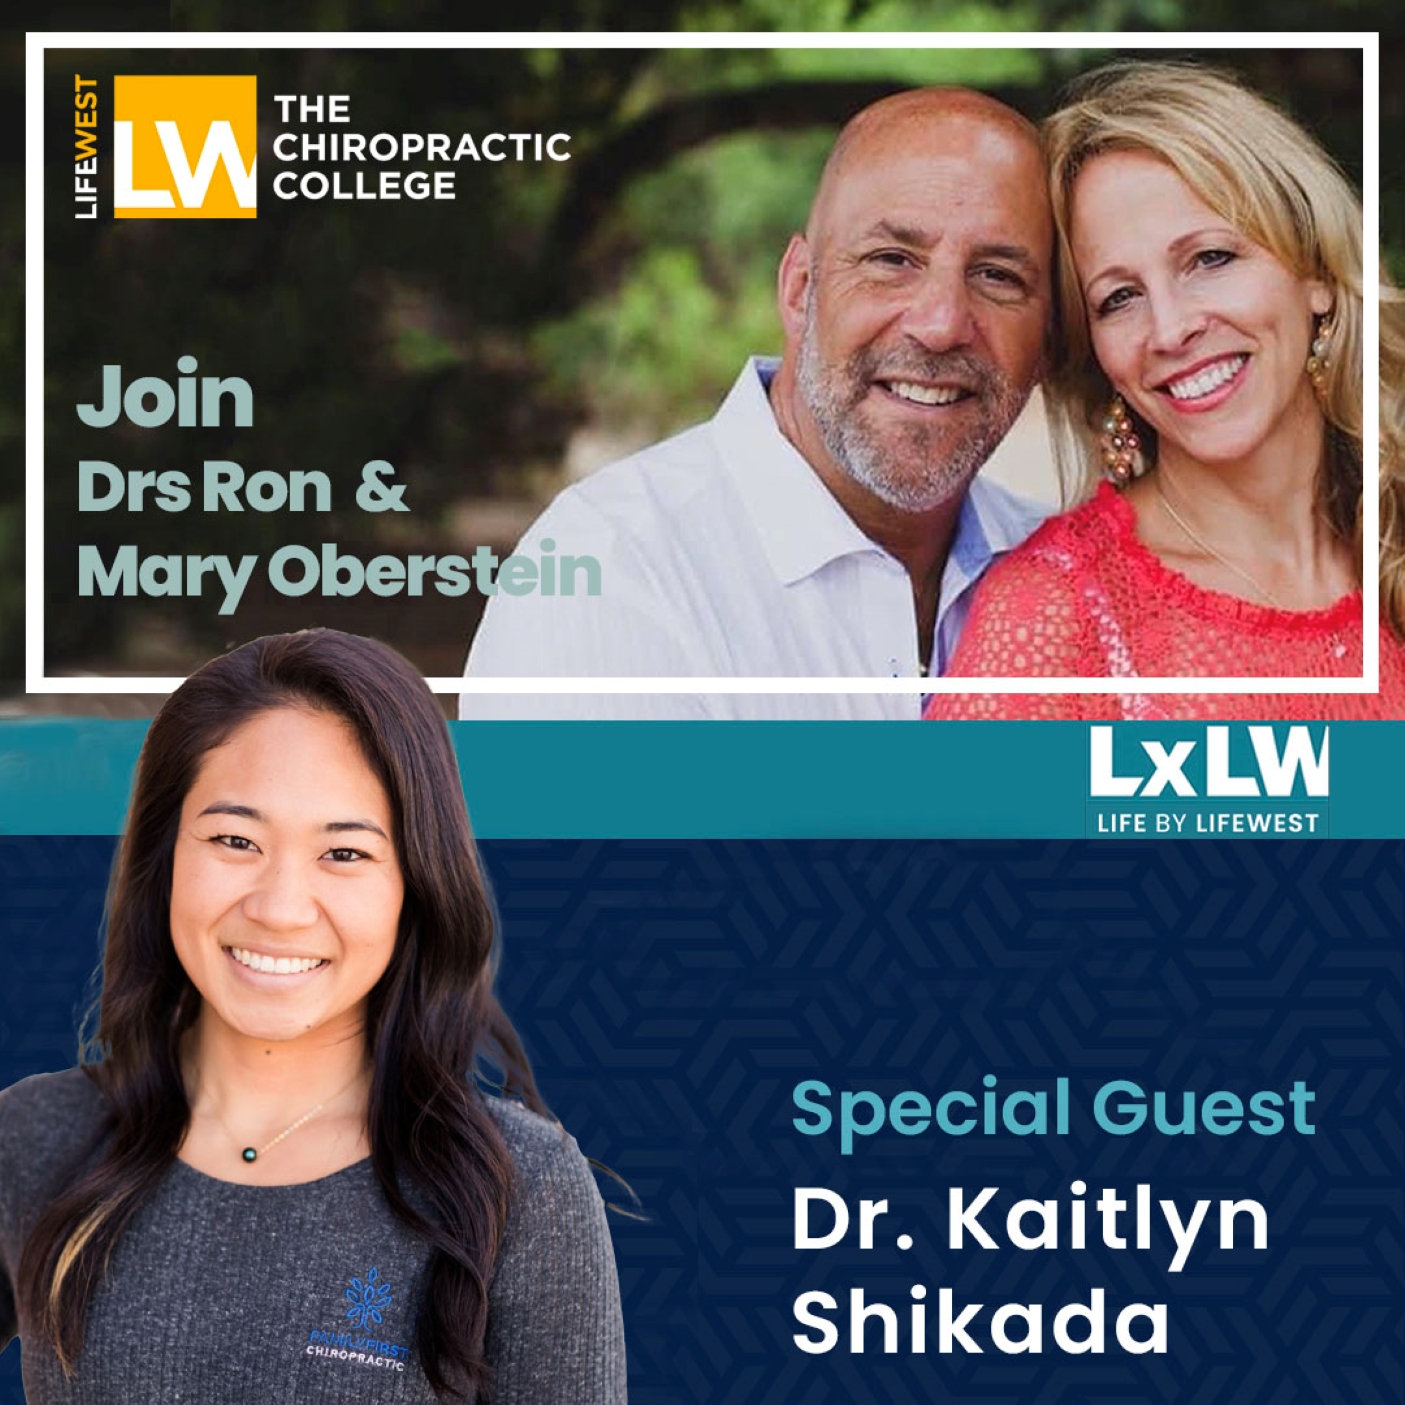 S4 Ep1 The Gift of Serving While Creating Awareness as an Associate Doctor with Dr. Kaitlyn Shikada